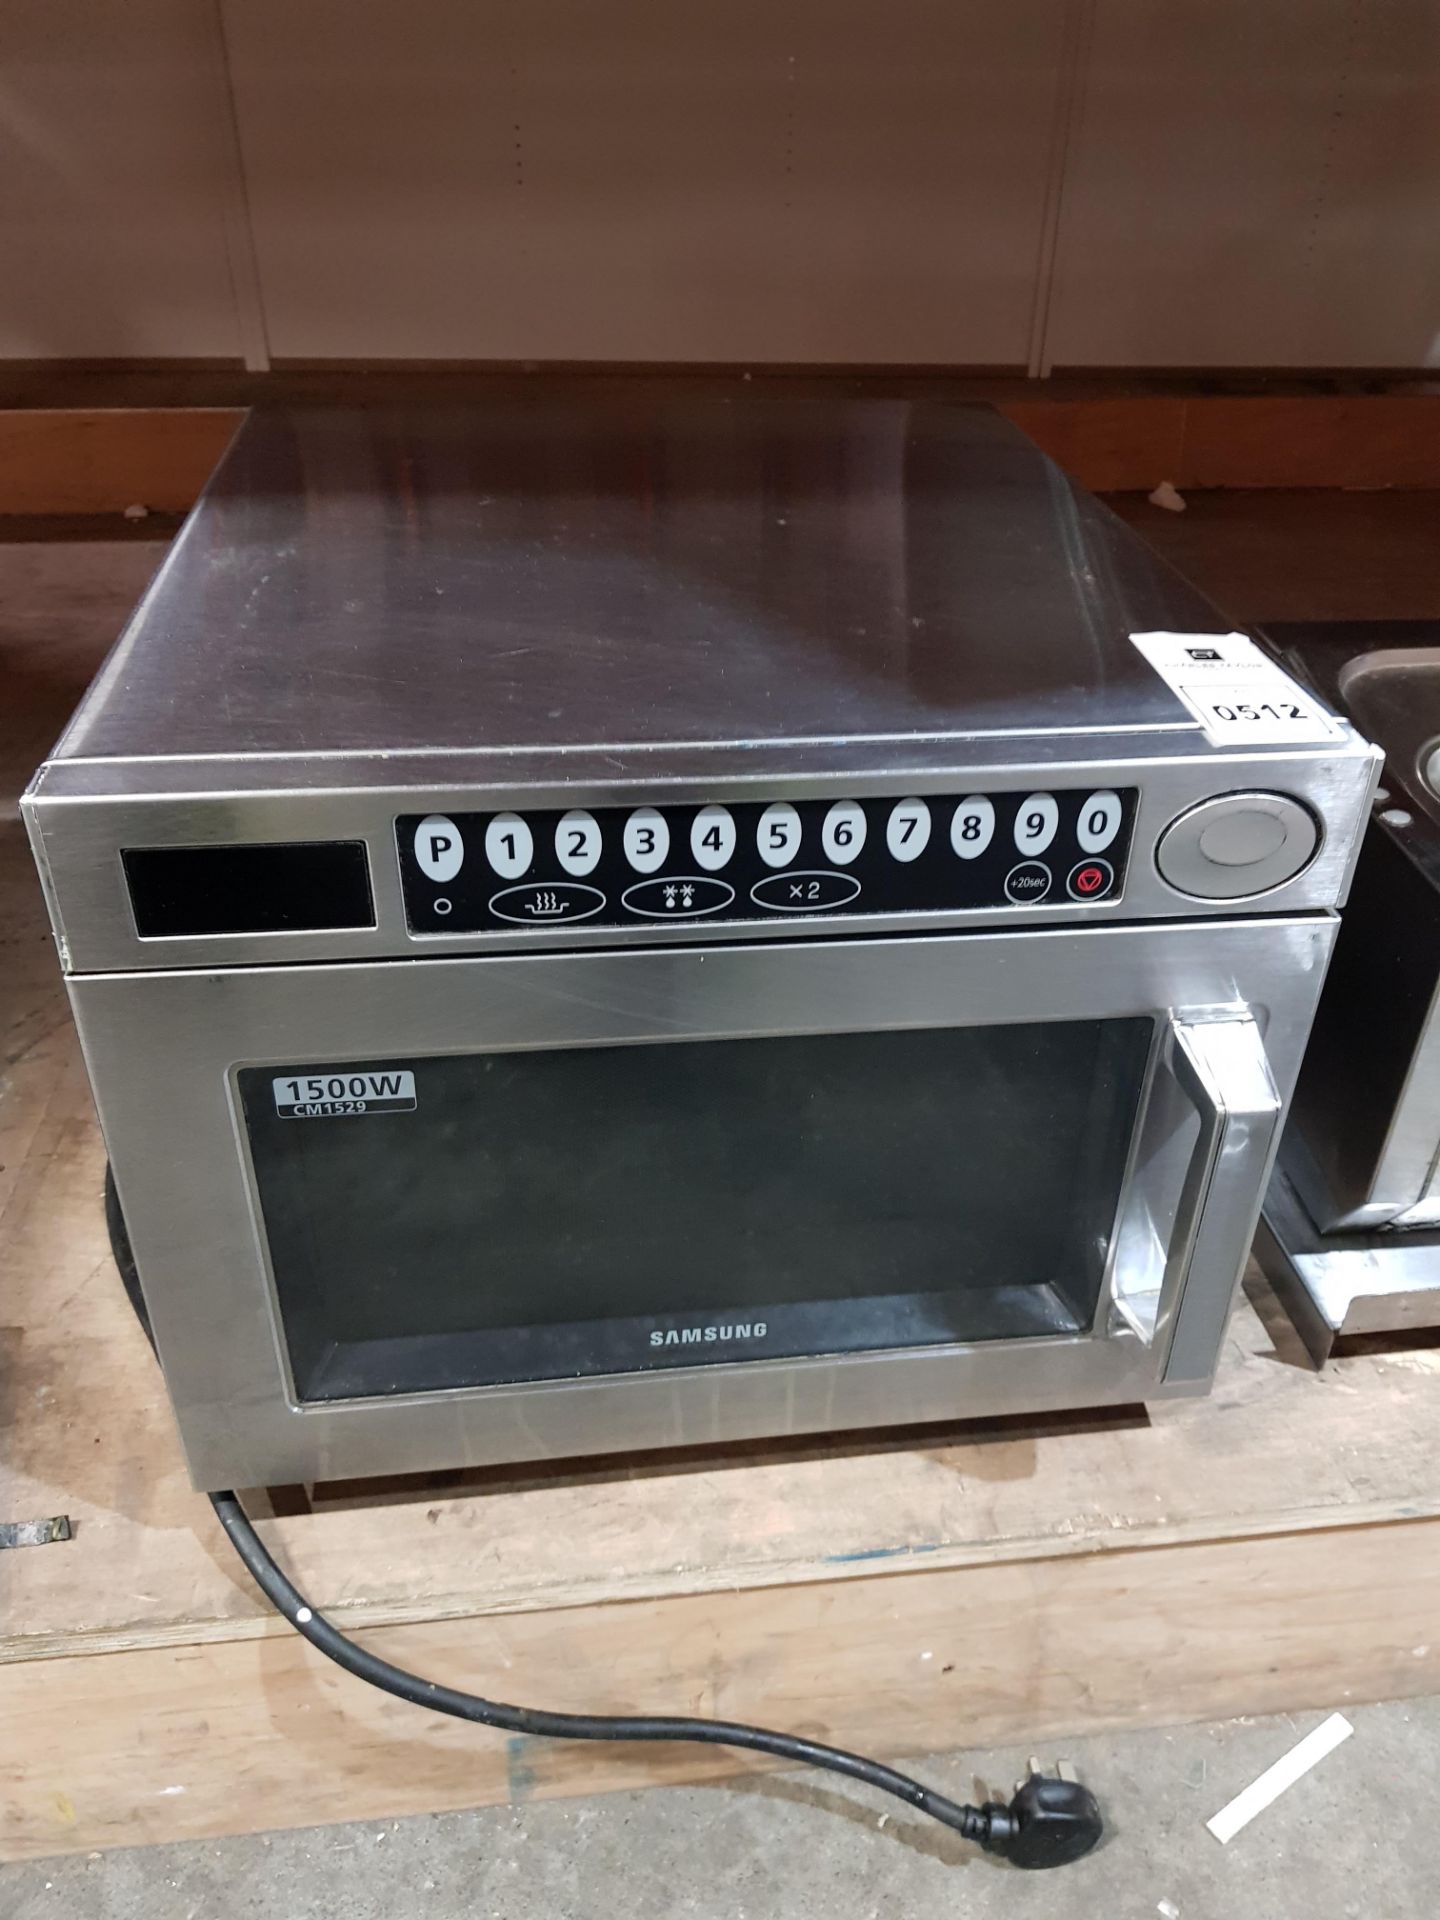 1 X SAMSUNG 230V MICROWAVE OVEN FOR COMMERCIAL KITCHEN USE (NOTE HAS SOME MARKS AND SCRATCHES)